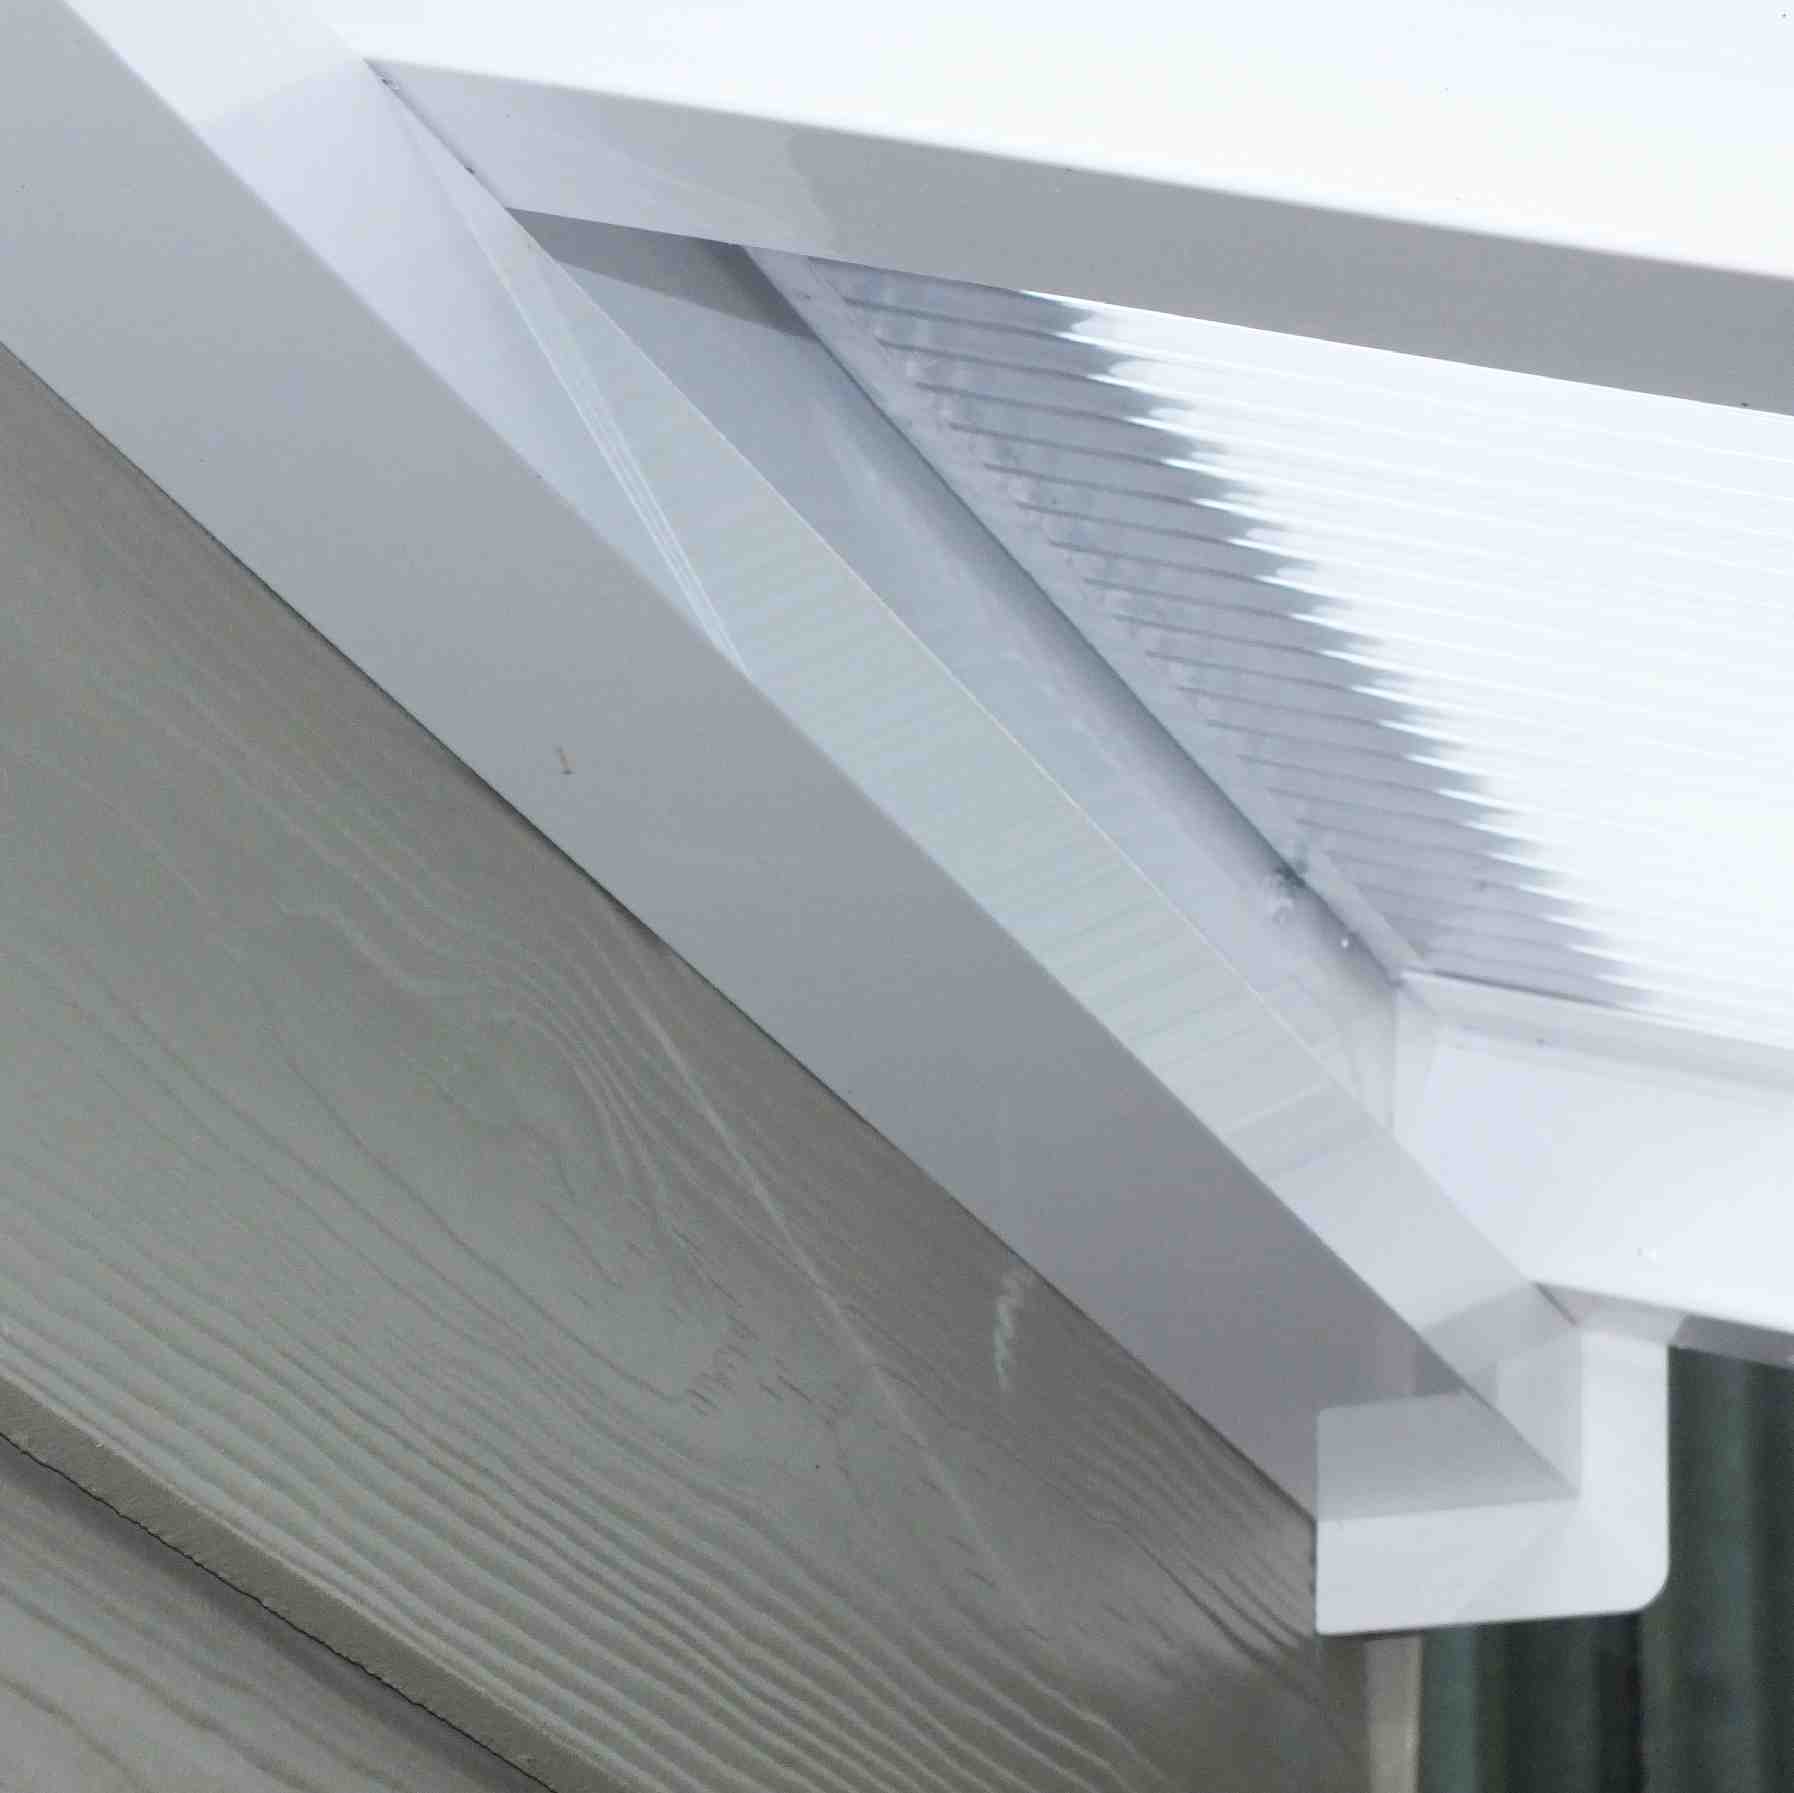 Great deals on Omega Verandah White with 16mm Polycarbonate Glazing - 3.1m (W) x 3.0m (P), (2) Supporting Posts